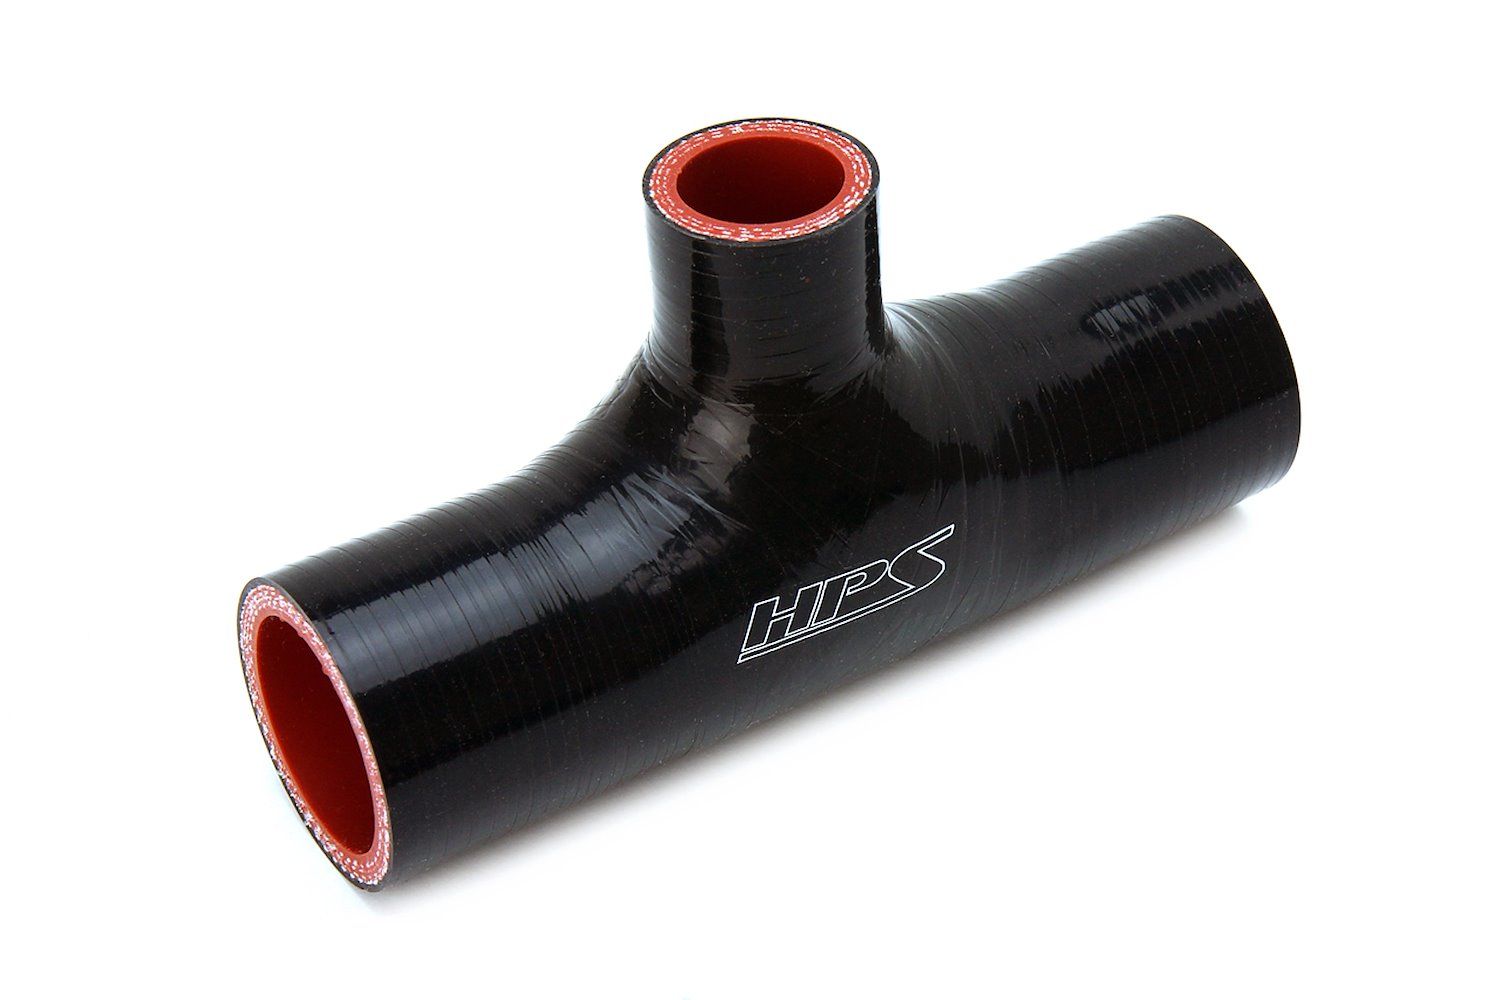 125-THOSE-100-BLK Silicone Tee Hose Adapter, High-Temp 4-Ply Reinforced, 1-1/4 in. ID, Black